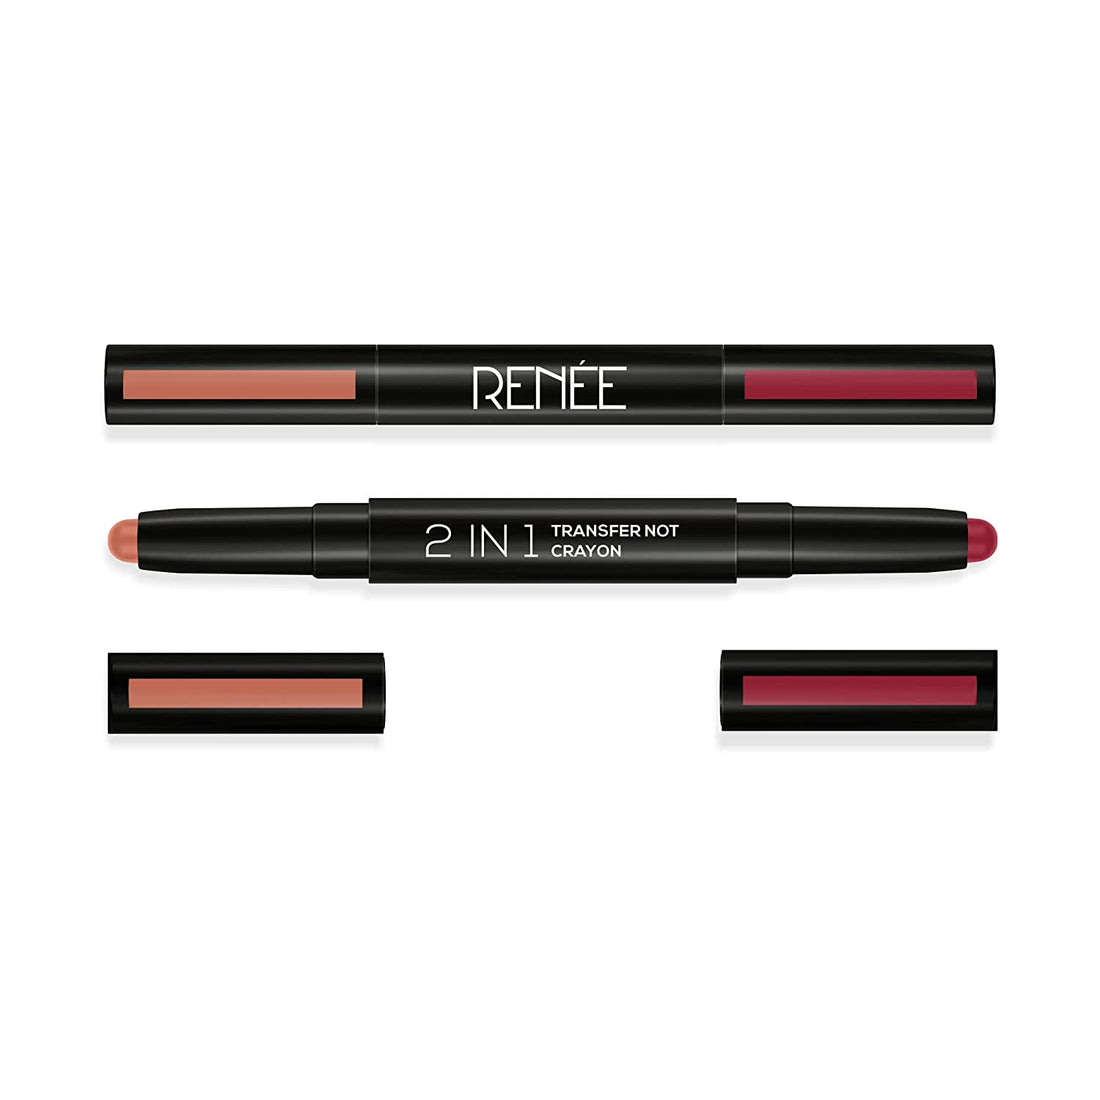 RENEE 2 in 1 Transfer Not Crayon, Long Lasting Smudgeproof Matte Lip Color with 2 Light & Dark Shades, Enriched with Shea Butter, LC 01 4gm